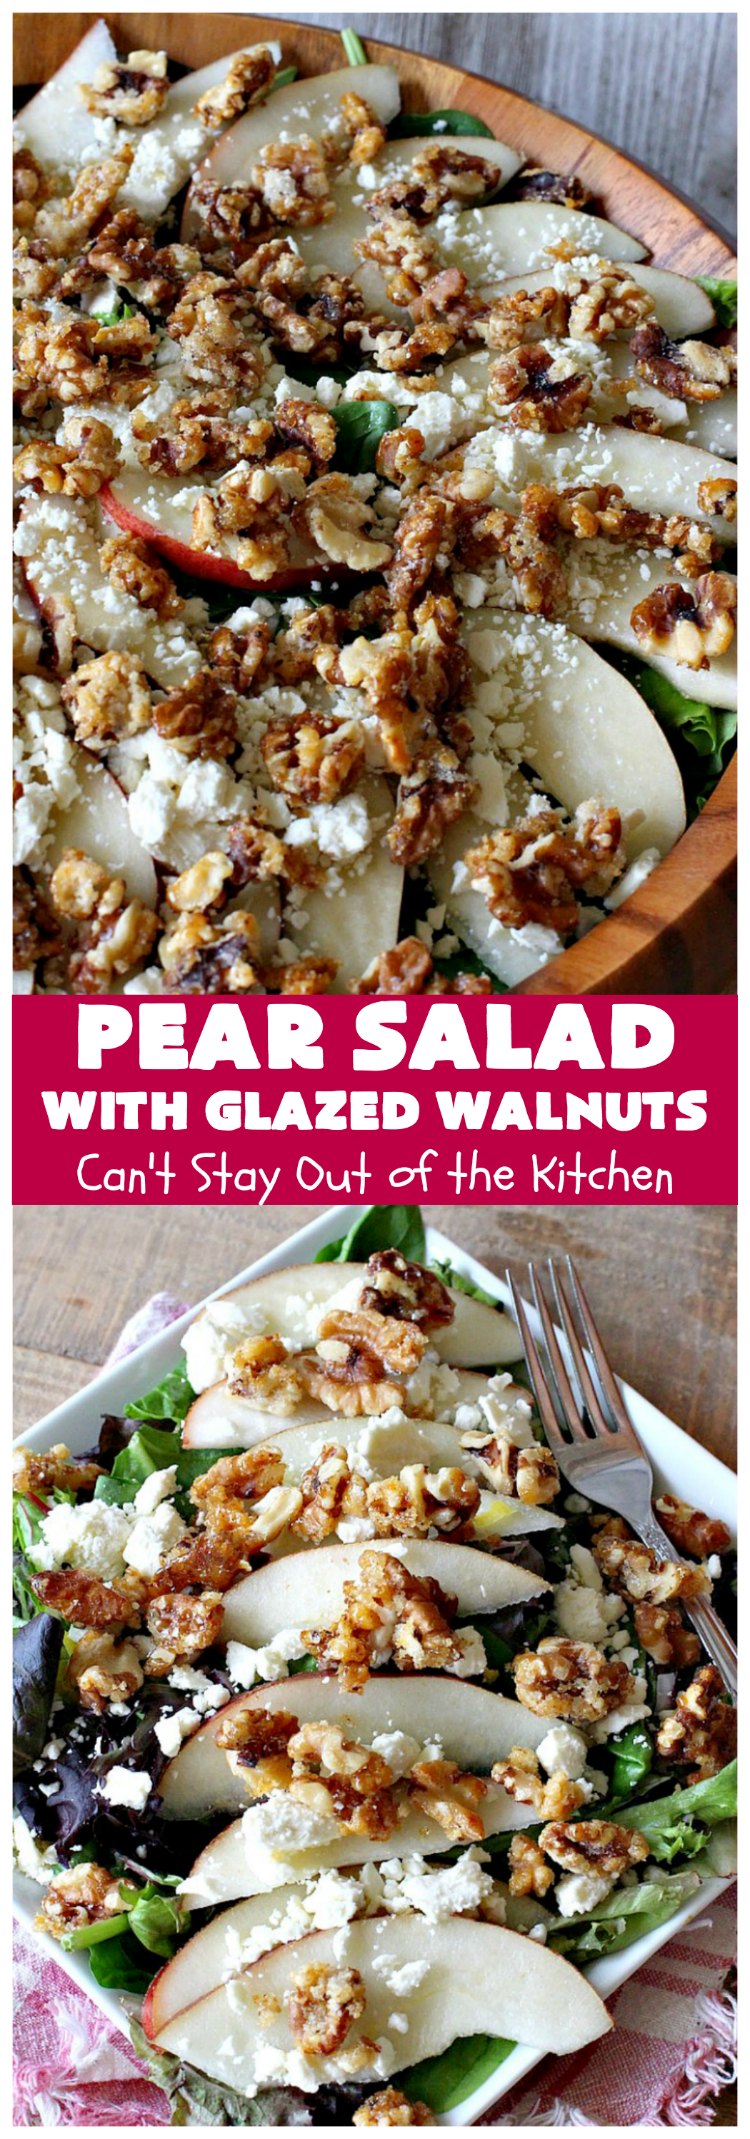 Pear Salad with Glazed Walnuts | Can't Stay Out of the Kitchen | this exotic #salad always gets rave reviews whenever I serve it. It's not difficult to make & so delicious. It uses  #GlazedWalnuts, #Pears, #FetaCheese & a wonderful homemade #Lemon #Vinaigrette. #GlutenFree #TossedSalad #LemonVinaigrette #TossedSaladWithPears #PearSaladWithGlazedWalnuts #holiday #HolidaySideDish #MothersDay #FathersDay #Thanksgiving